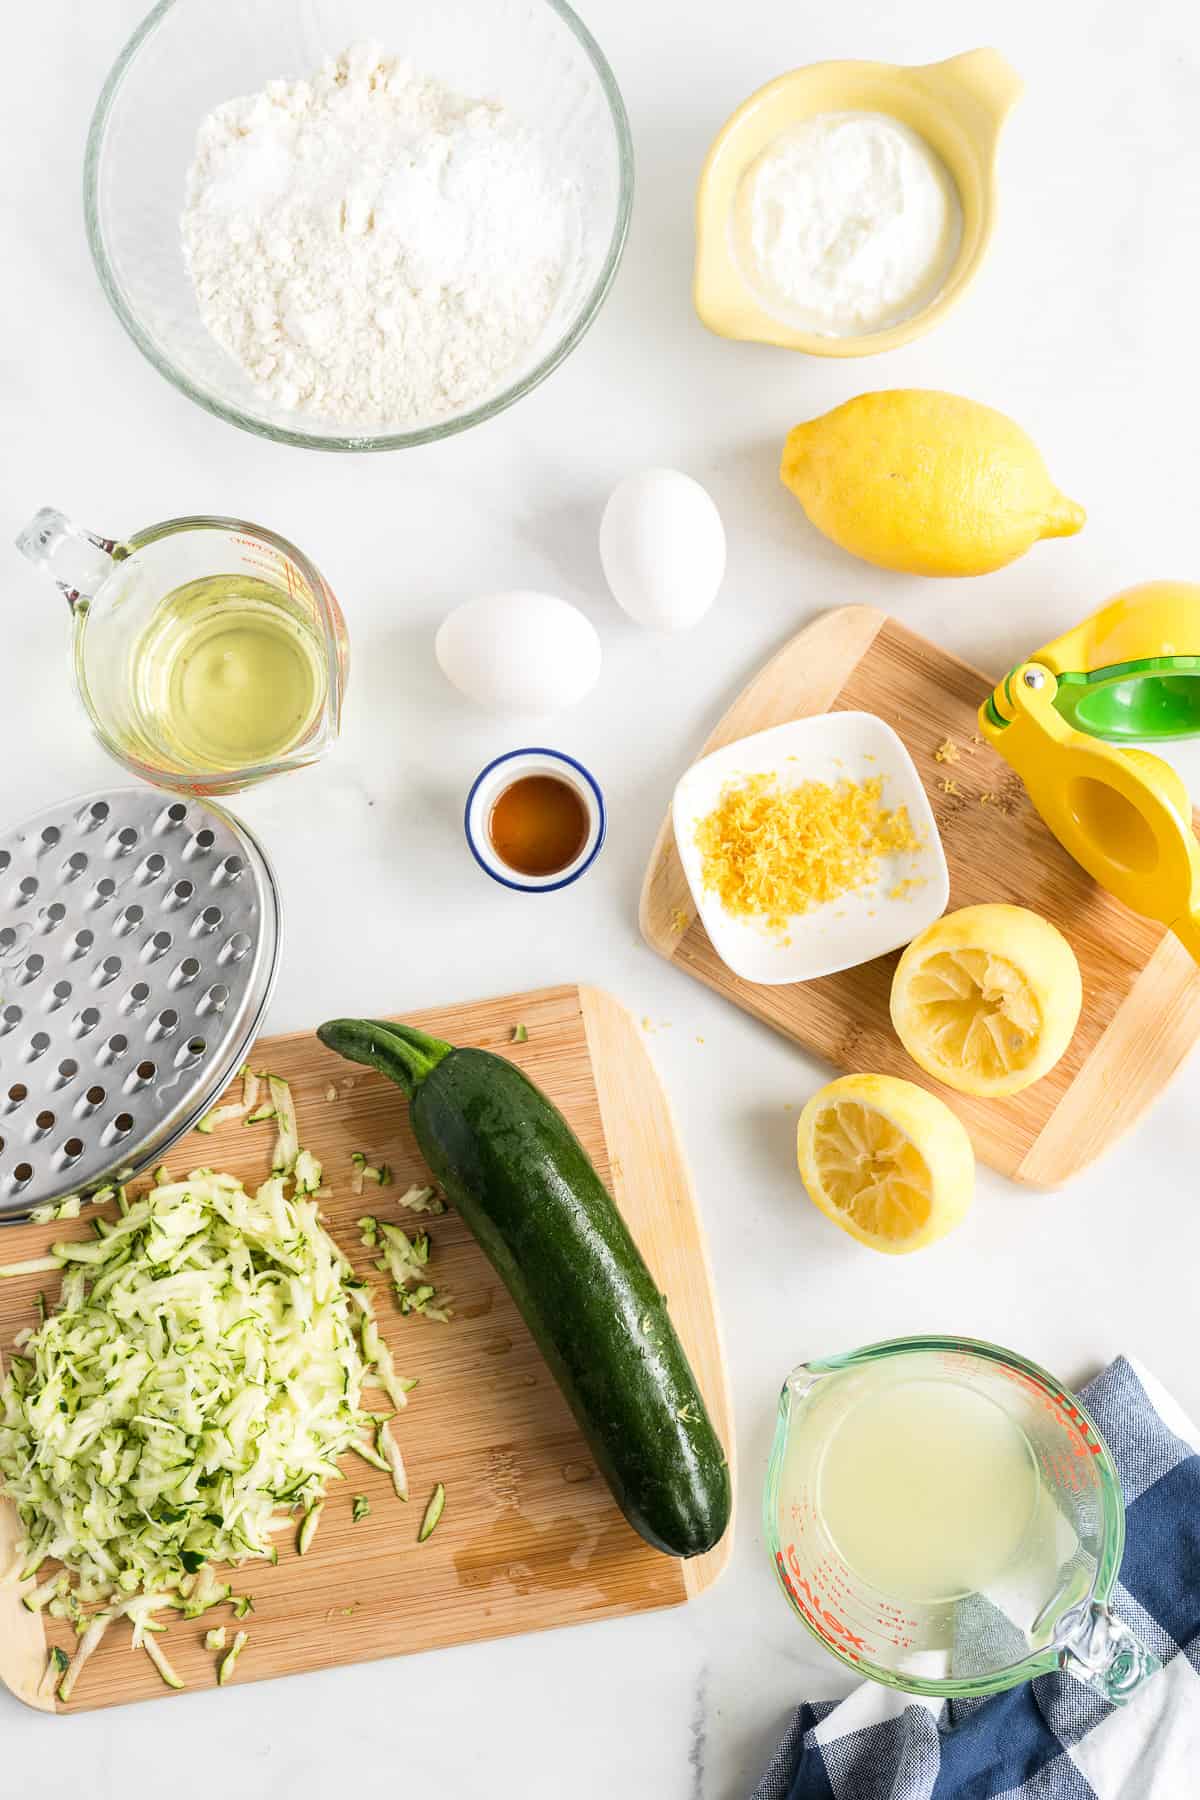 Lemon, zucchini, oil and other ingredients on a white counter.